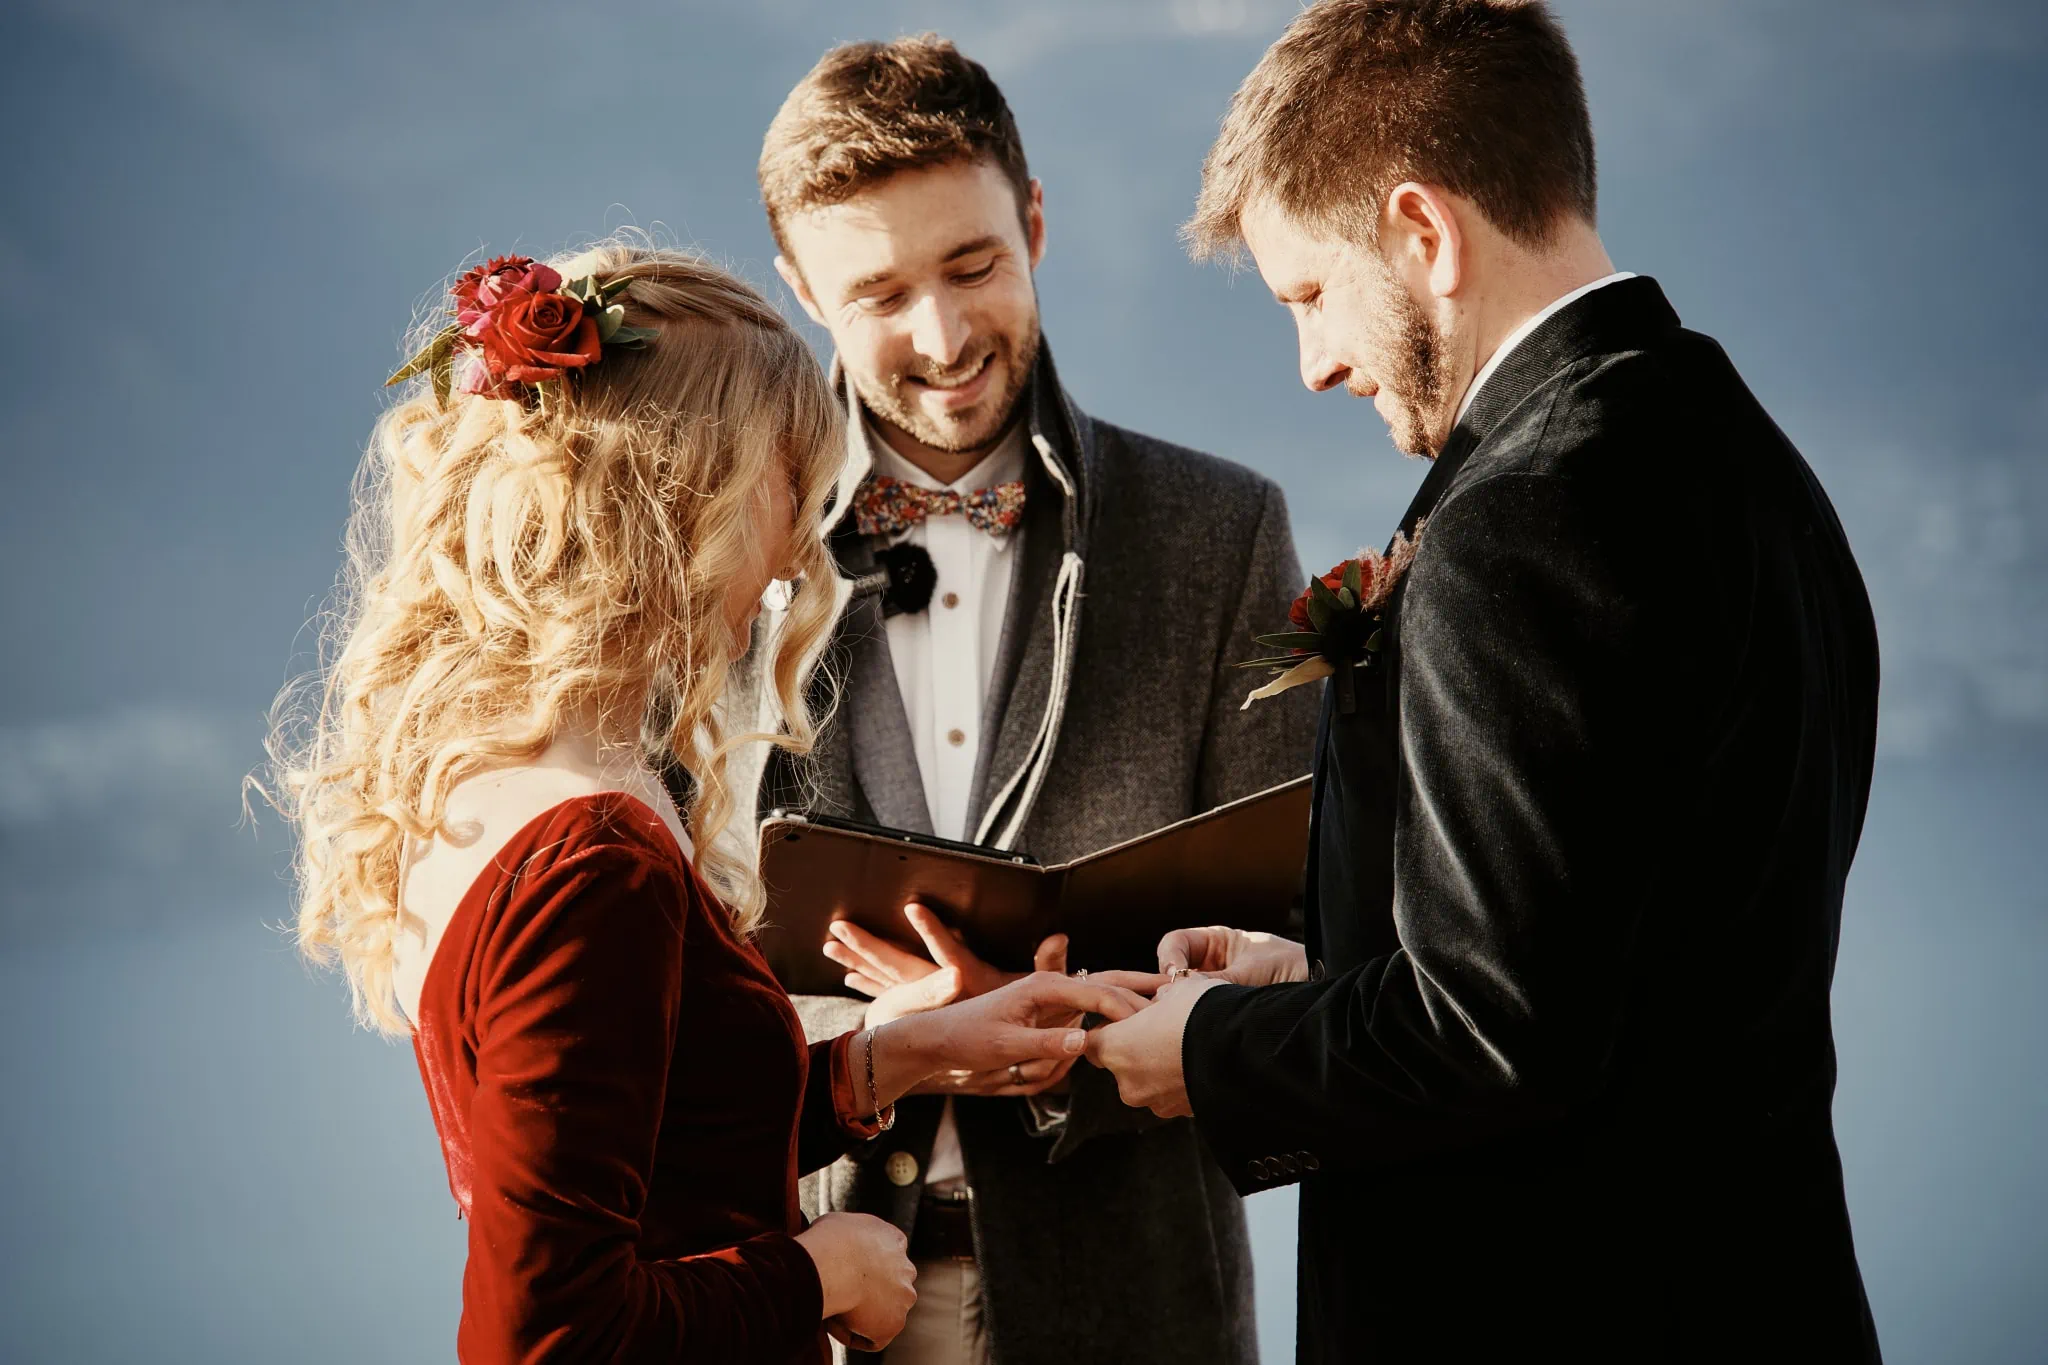 Claire and Rob exchange rings during their heli elopement wedding at Cecil Peak.